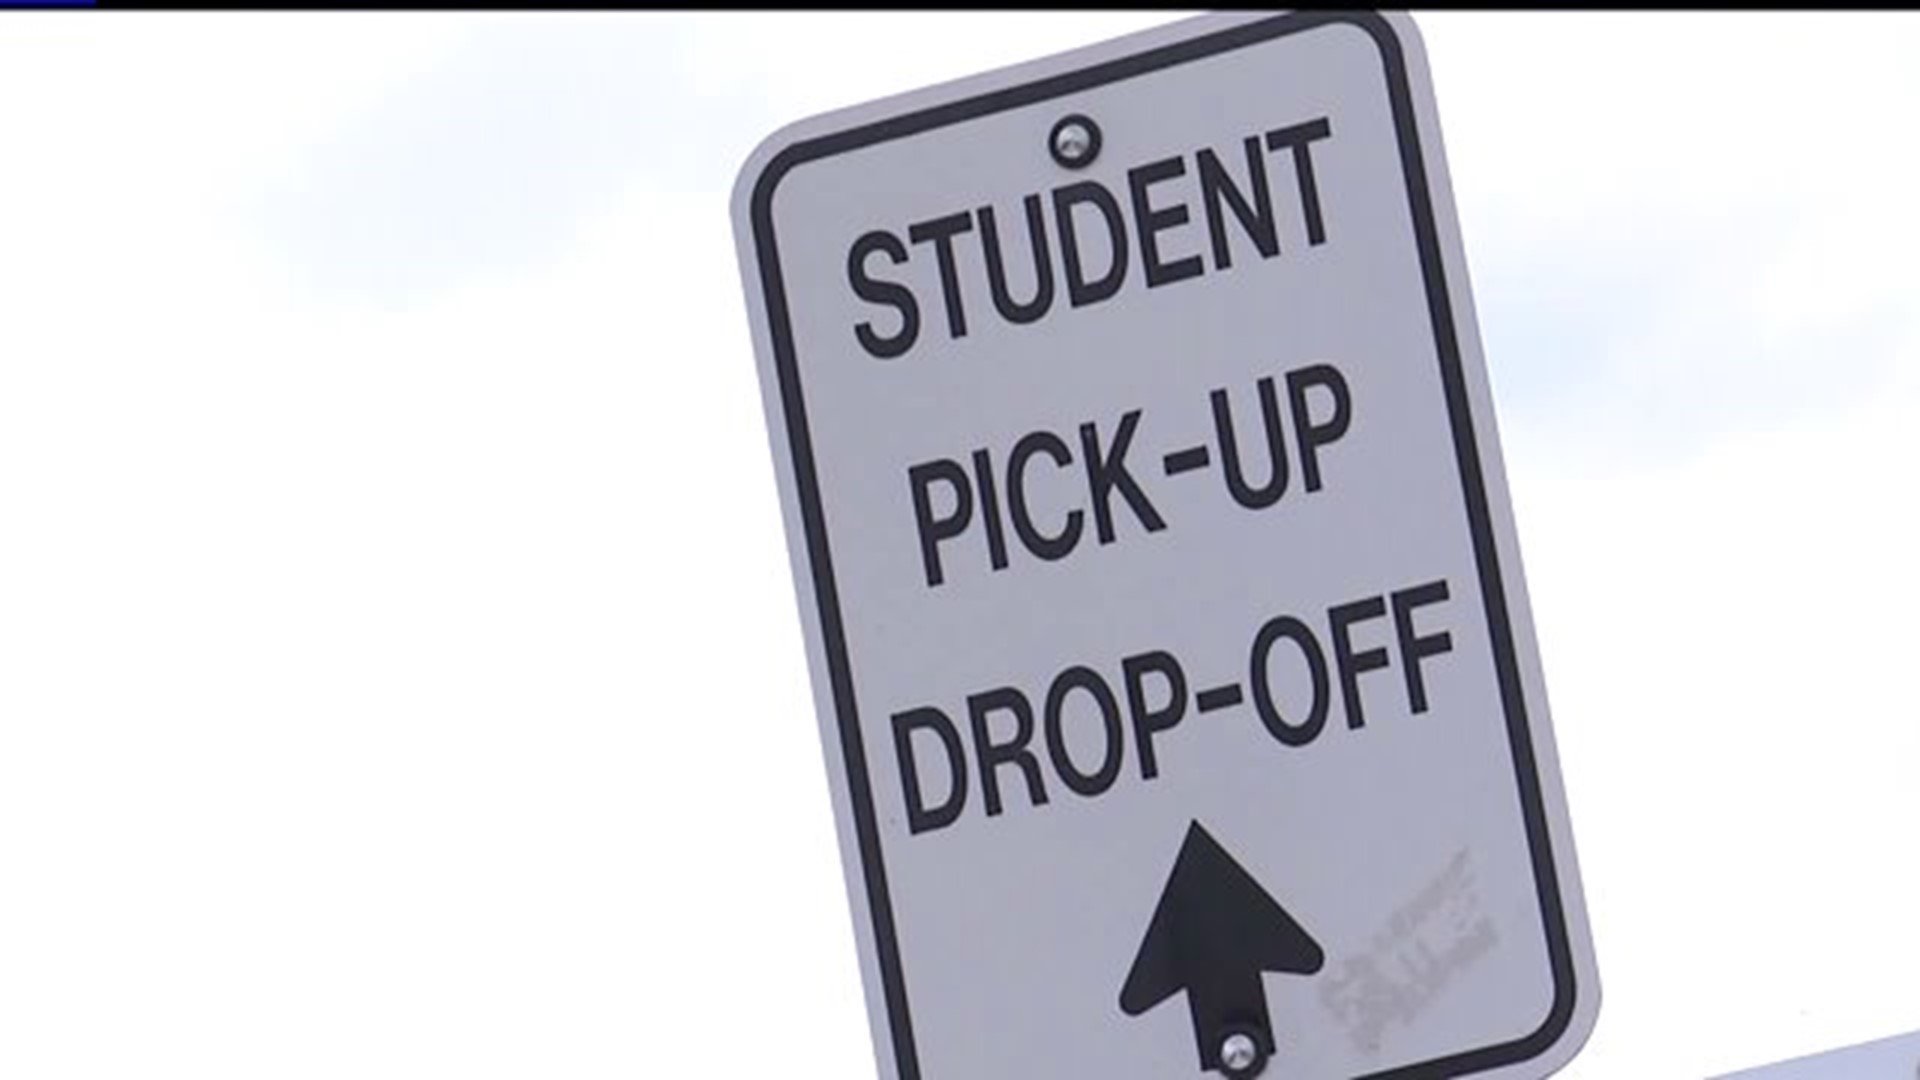 Parents concerned about location of bus stop